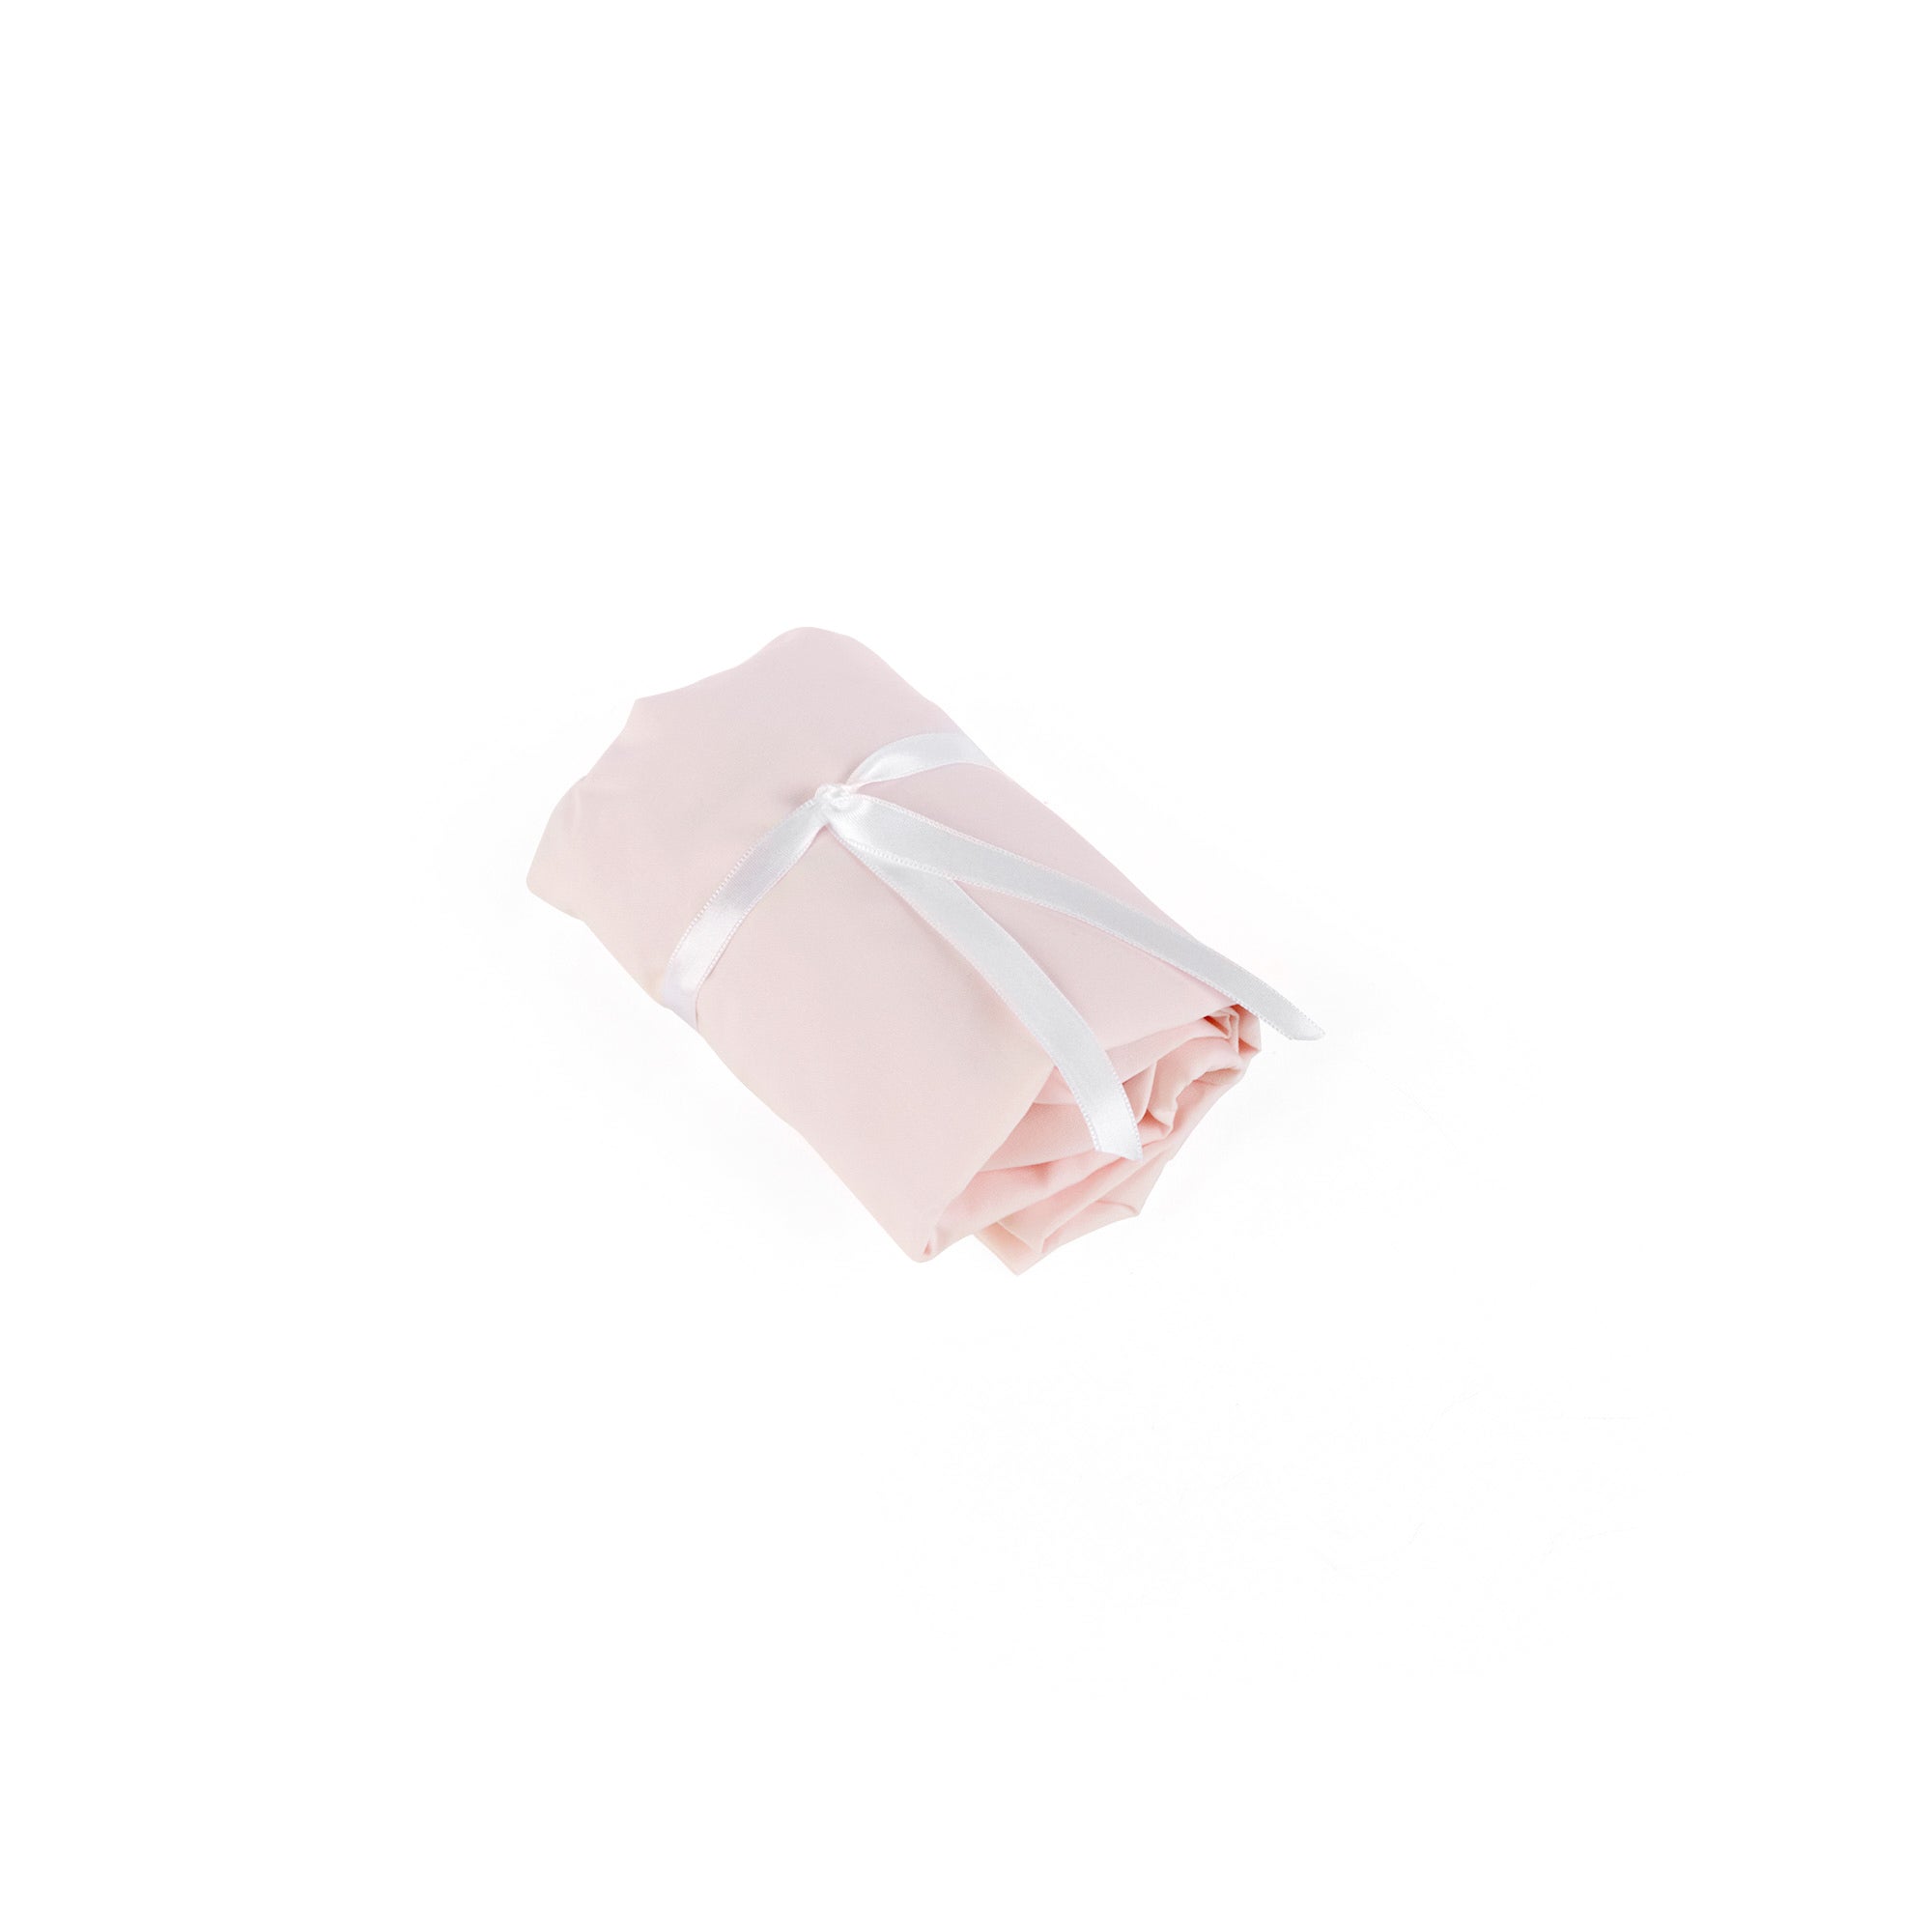 Theophile & Patachou Cradle Fitted Sheet - Cotton Pink